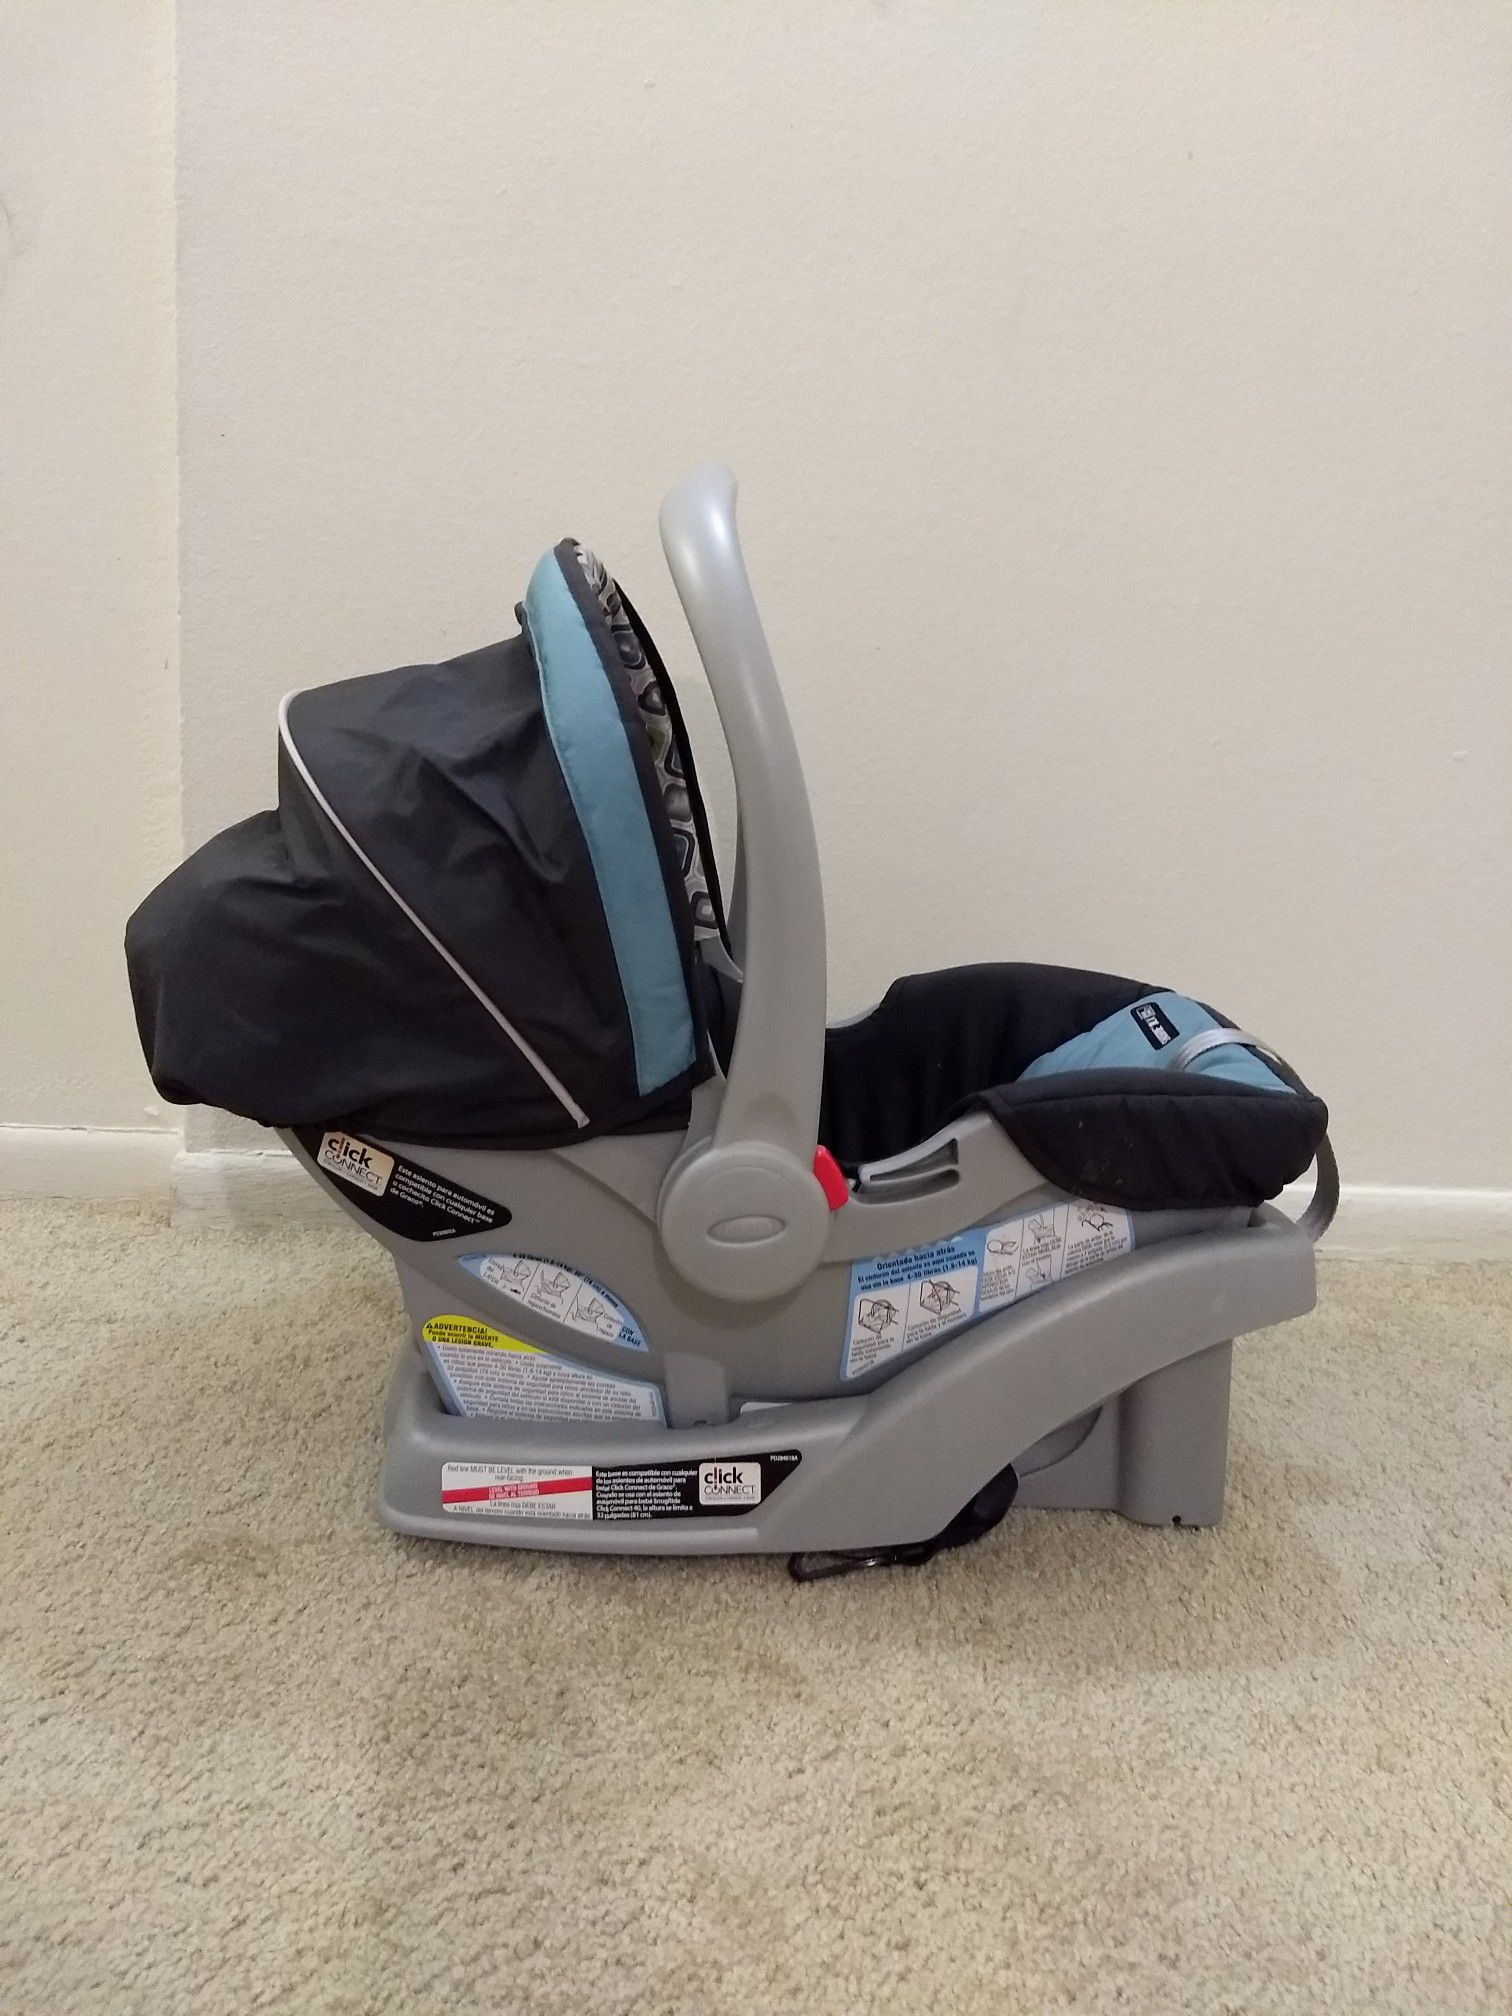 GRACO SNUGRIDE 30 INFANT CAR SEAT with free rear view mirror